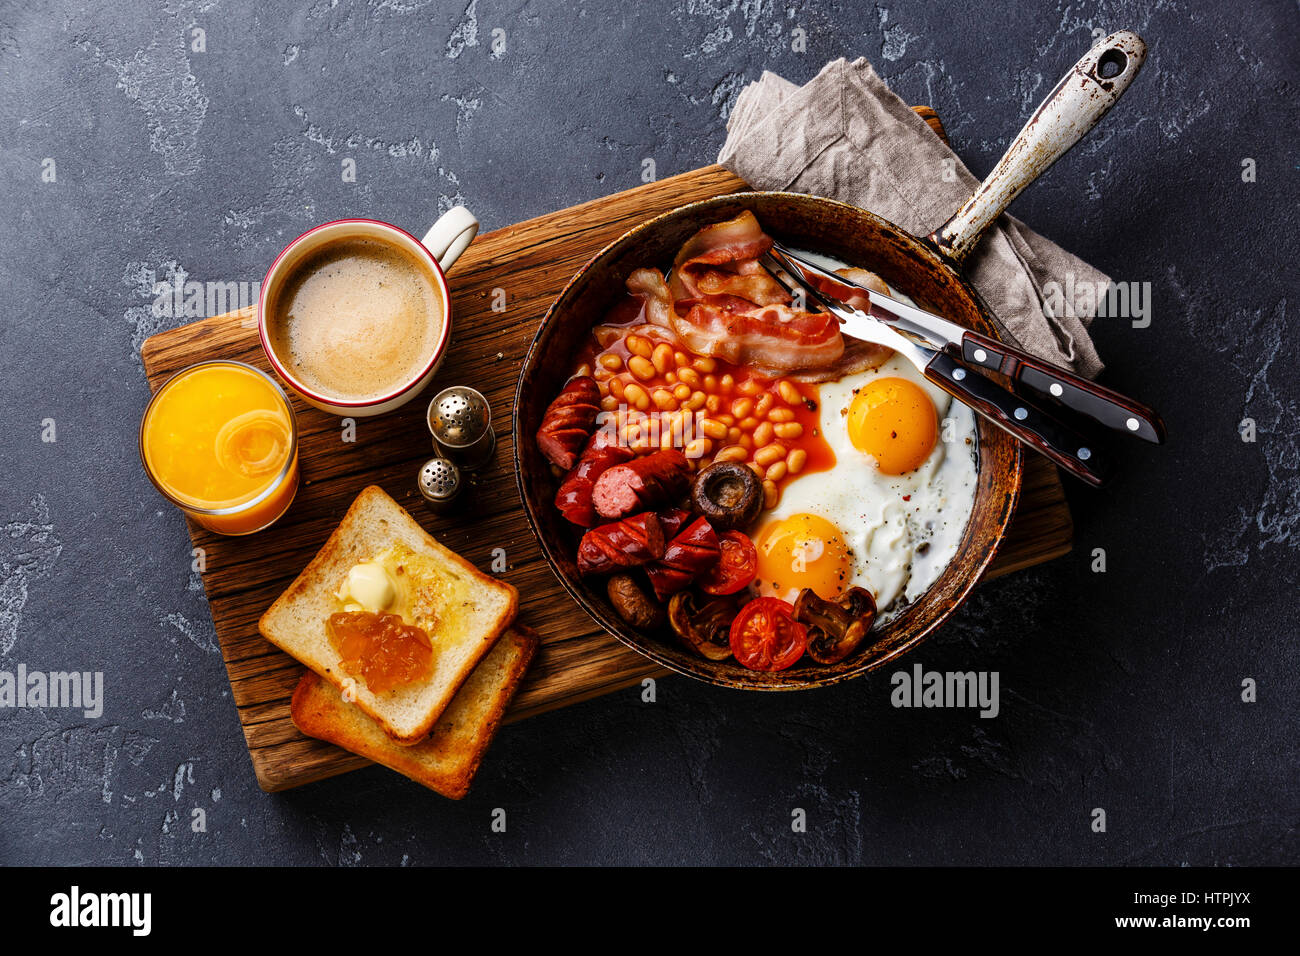 English Breakfast in cooking pan with fried eggs, sausages, bacon, beans, toasts and coffee on dark stone background Stock Photo